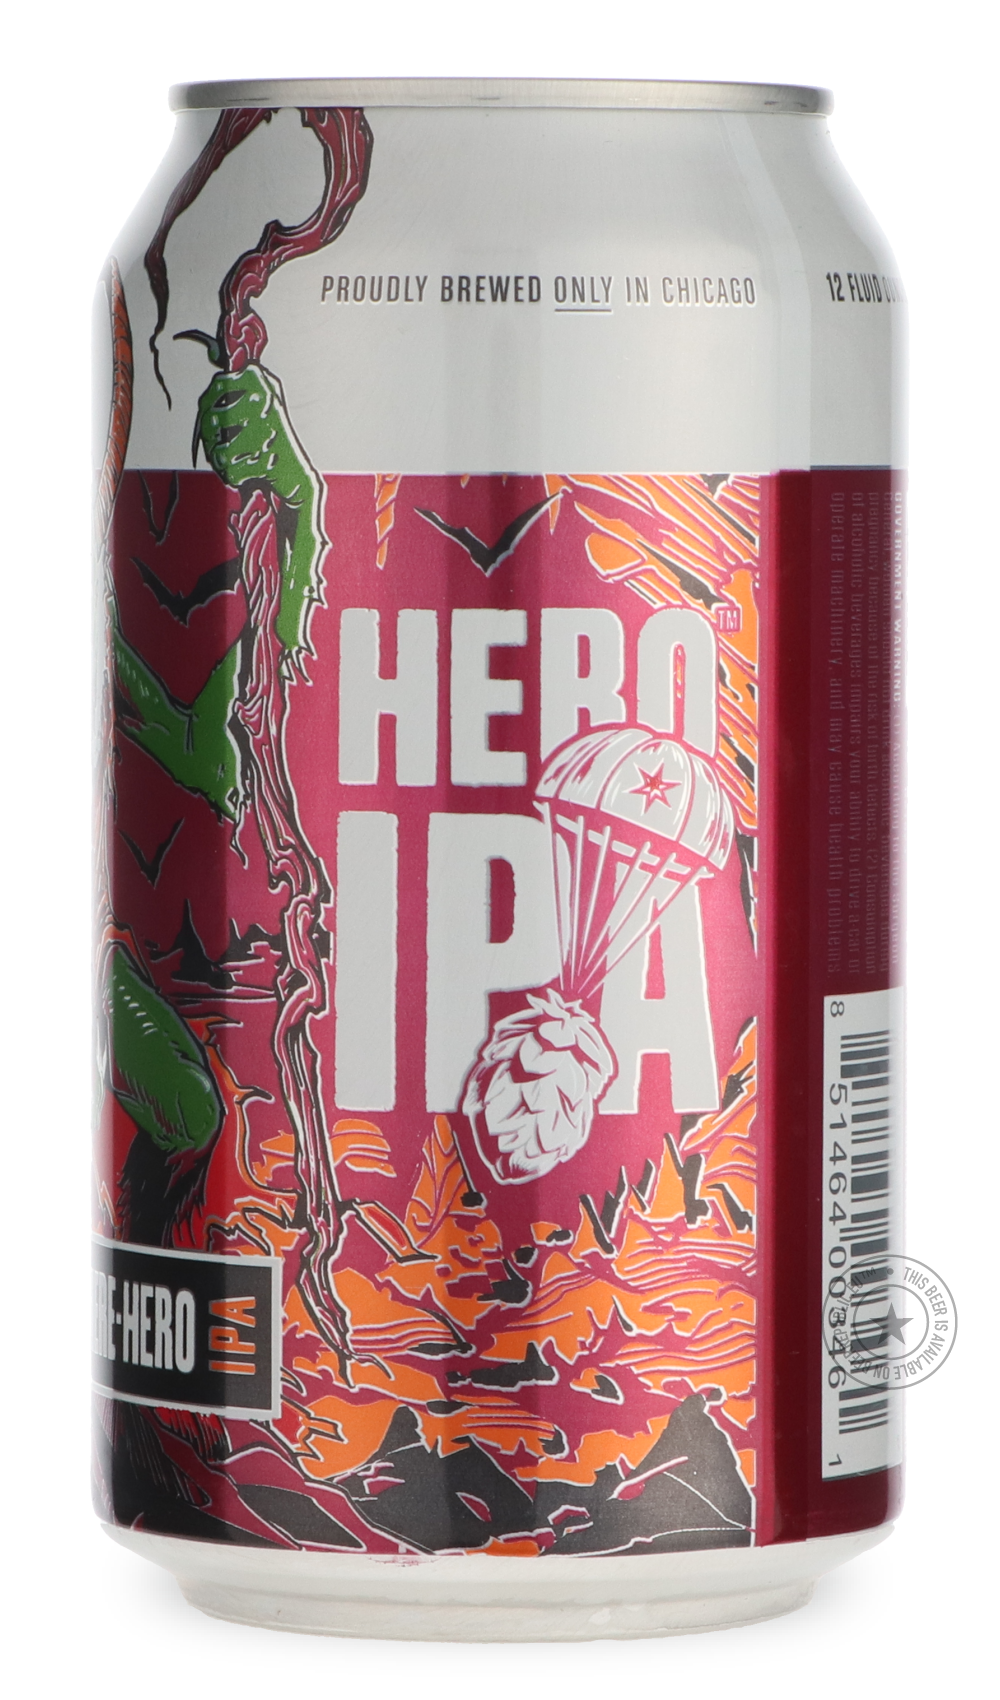 -Revolution- Cashmere Hero-IPA- Only @ Beer Republic - The best online beer store for American & Canadian craft beer - Buy beer online from the USA and Canada - Bier online kopen - Amerikaans bier kopen - Craft beer store - Craft beer kopen - Amerikanisch bier kaufen - Bier online kaufen - Acheter biere online - IPA - Stout - Porter - New England IPA - Hazy IPA - Imperial Stout - Barrel Aged - Barrel Aged Imperial Stout - Brown - Dark beer - Blond - Blonde - Pilsner - Lager - Wheat - Weizen - Amber - Barley